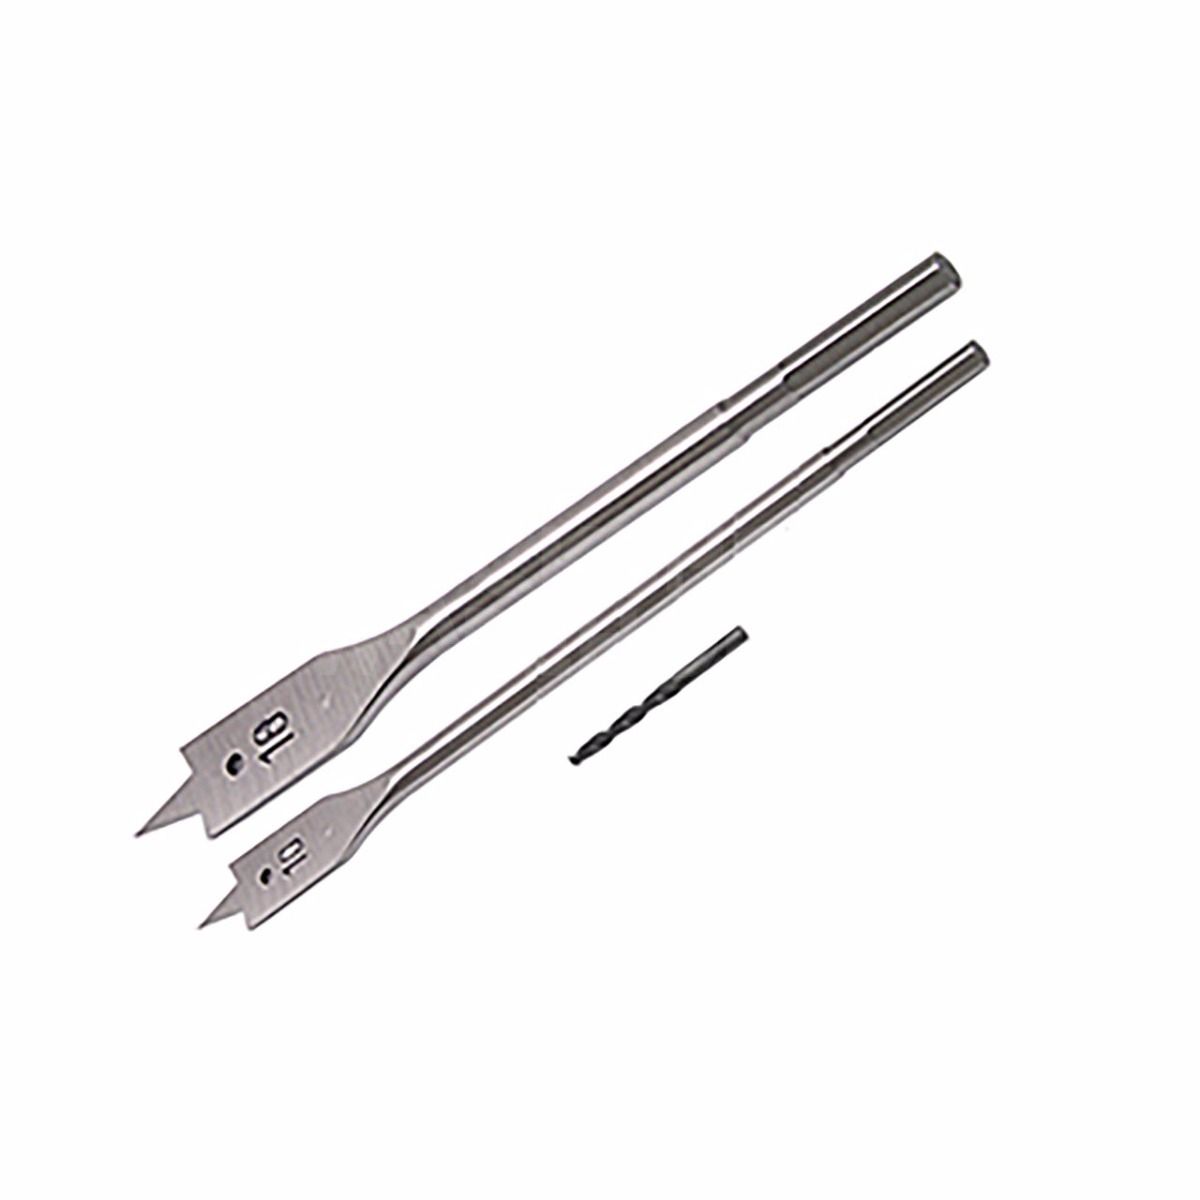 Suitable Size Drill Bits to fit Mortice Locks